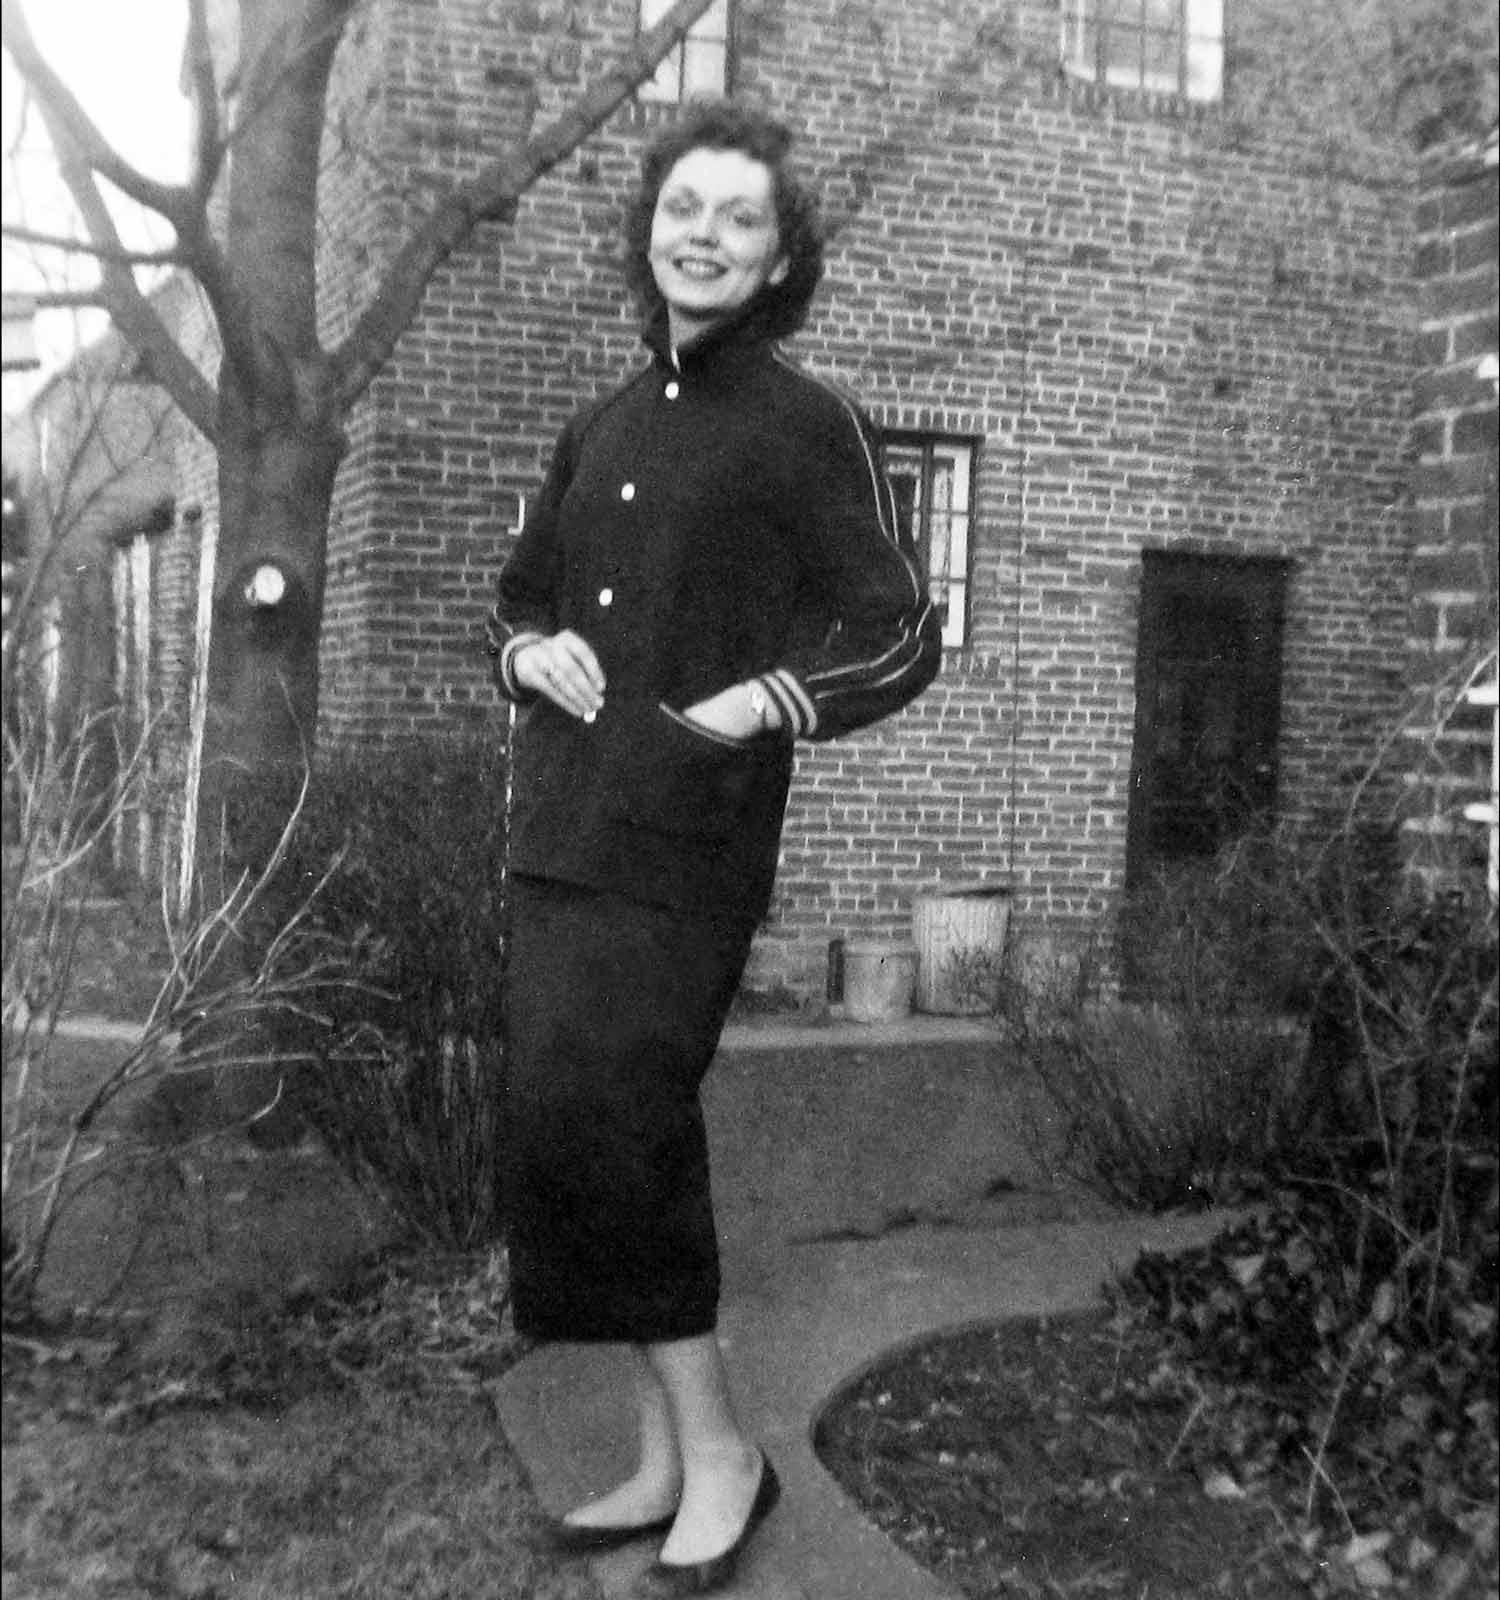 Black and white image of Nancy Holt standing outside a brick building